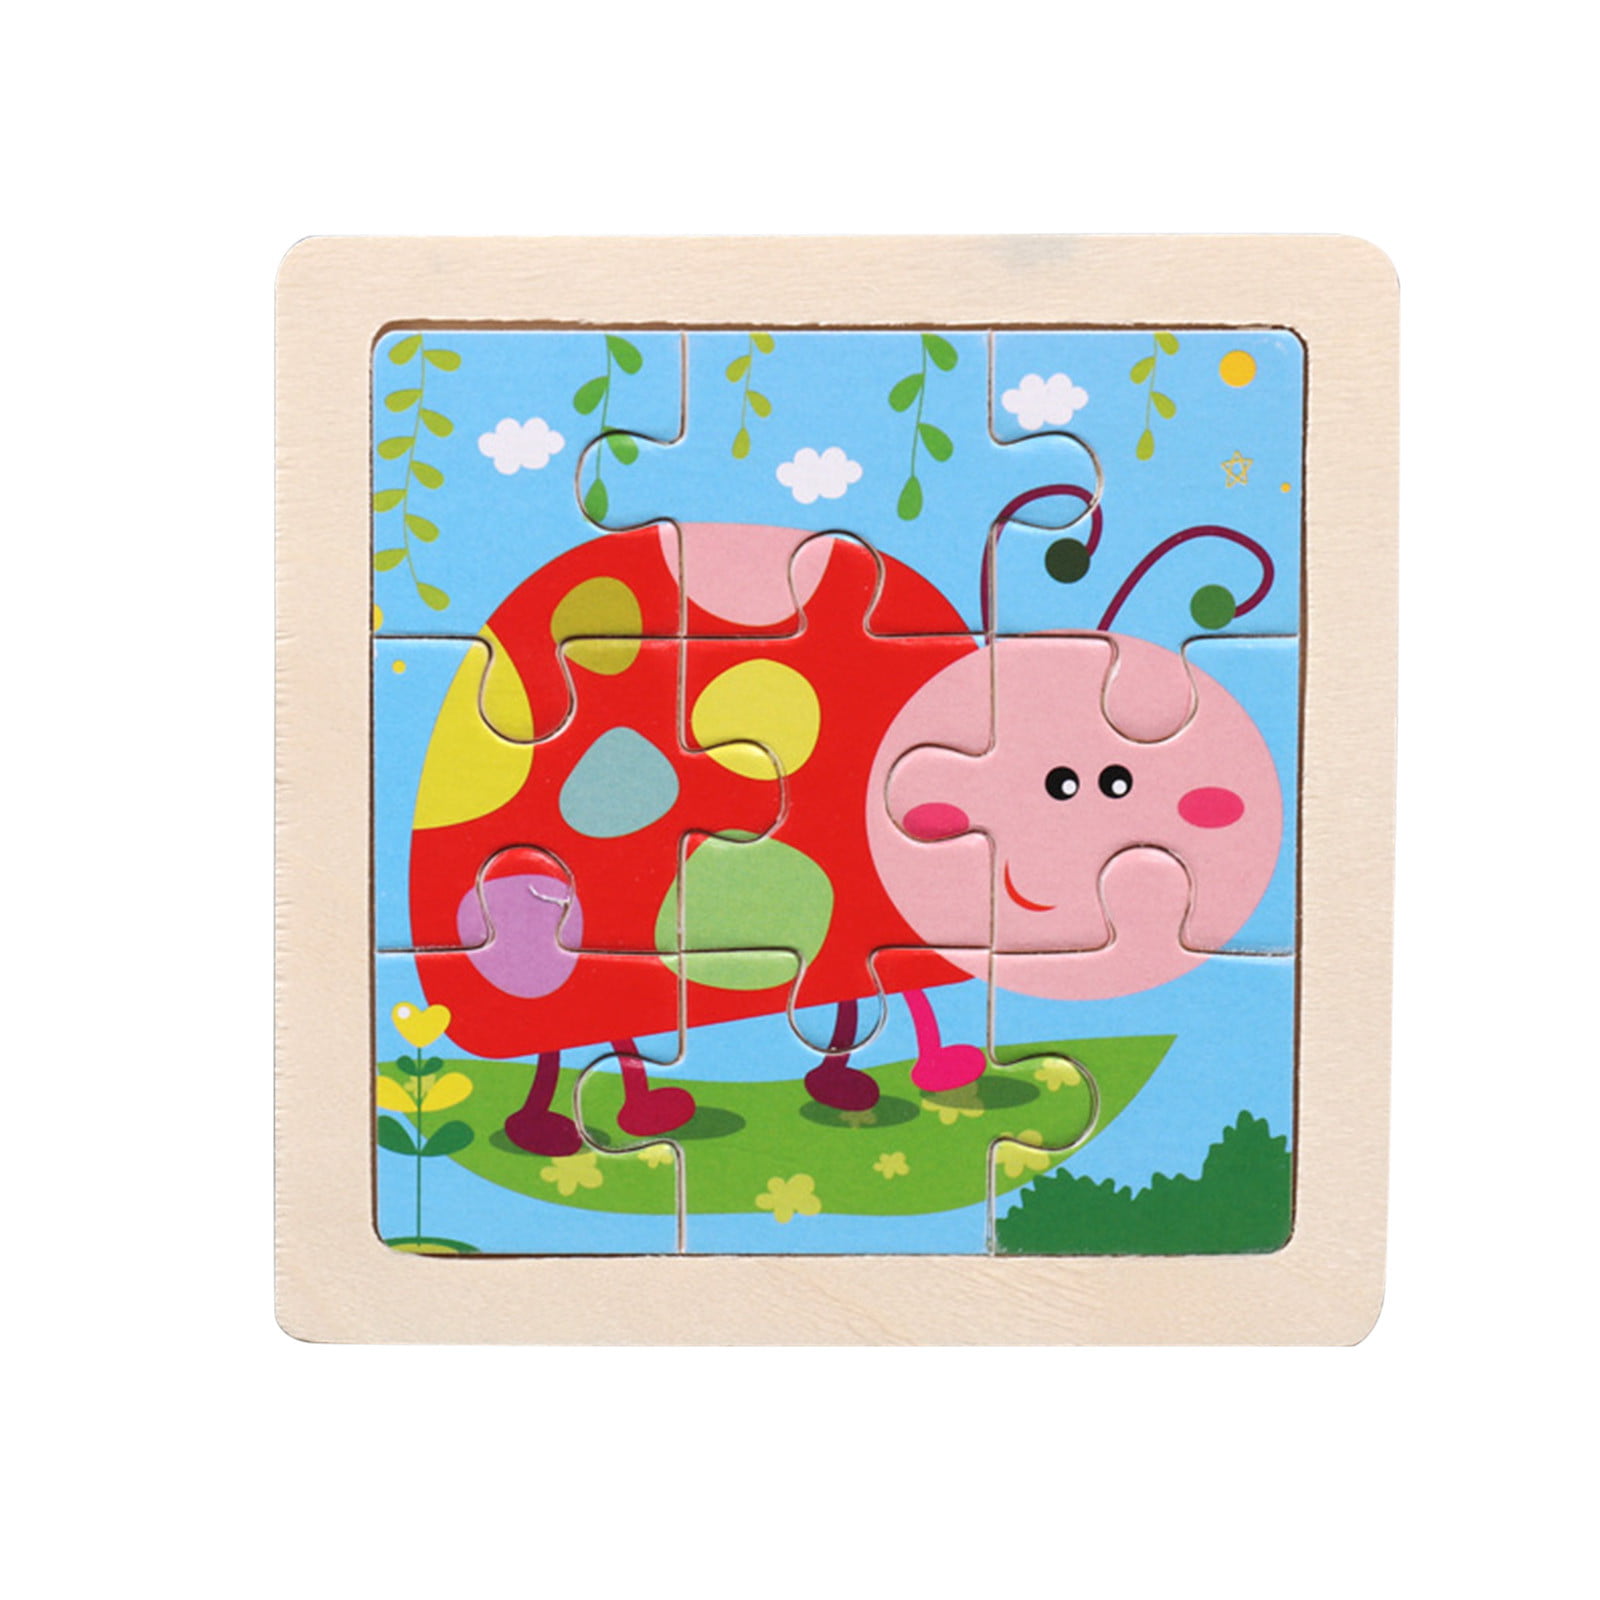 Wooden Puzzle Kids Toy Puzzles Jigsaw Cartoon Animal Early Educational for Child